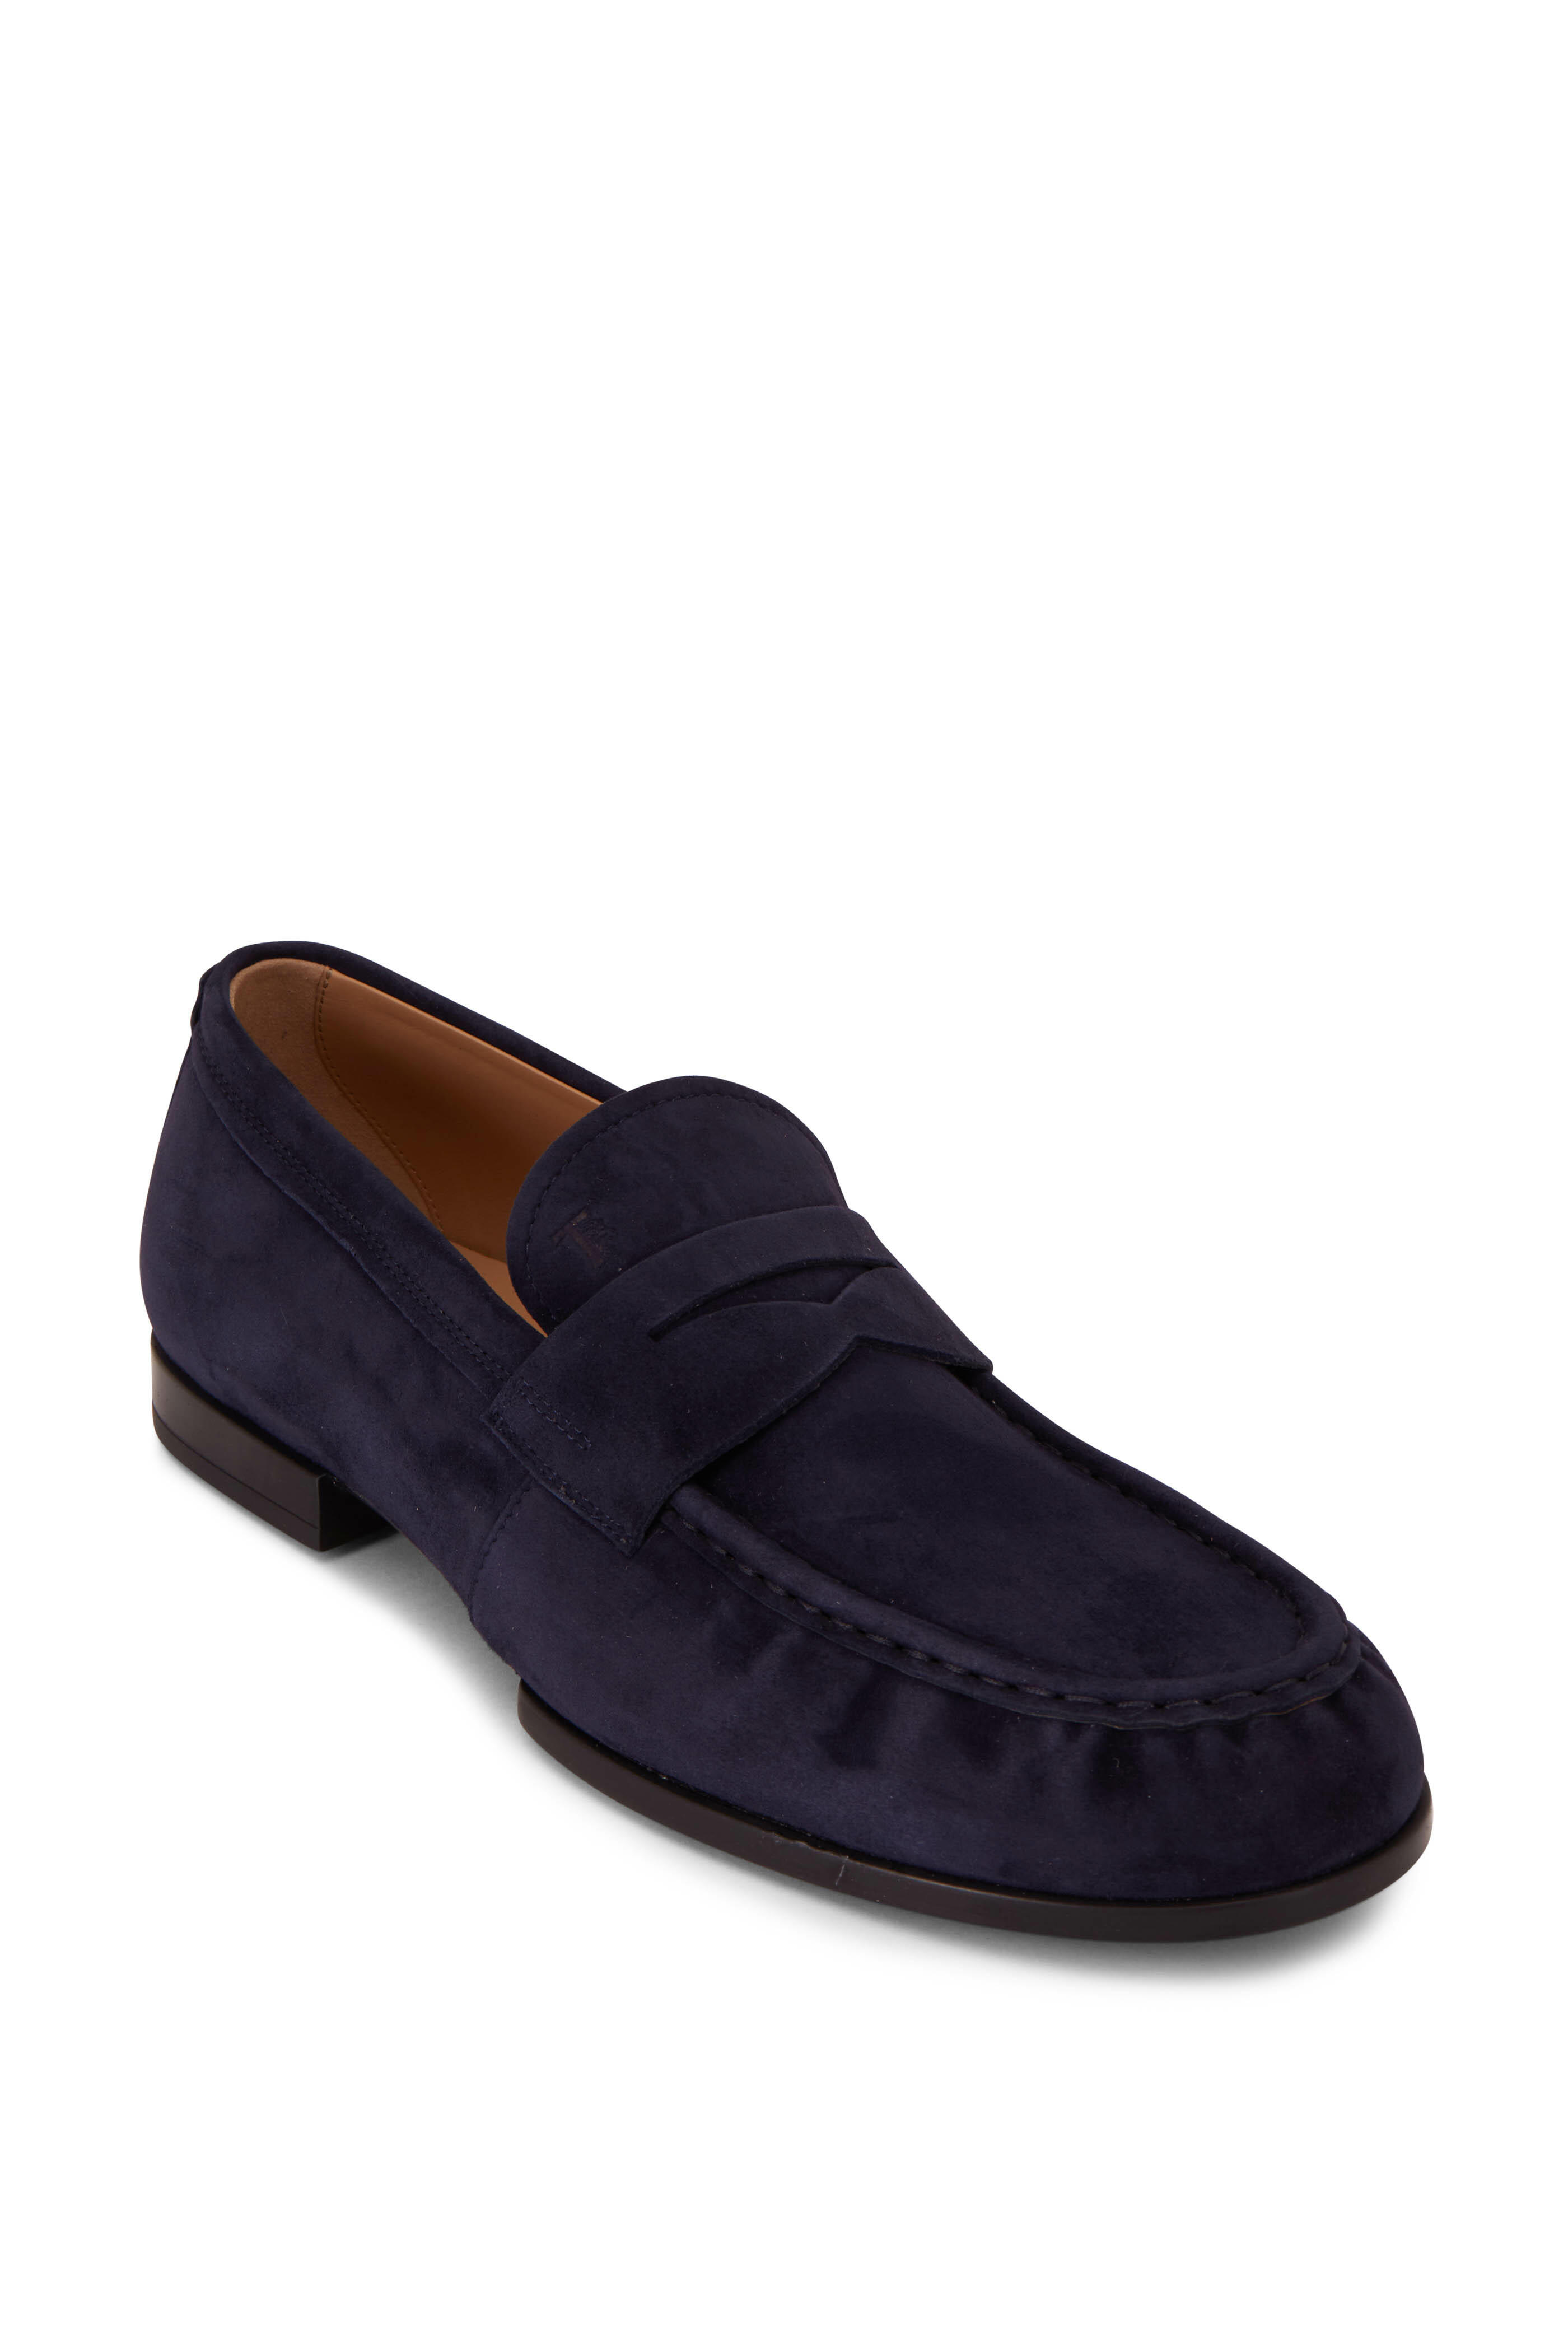 Tod's - Mocassino Navy Suede Penny Loafer | Mitchell Stores